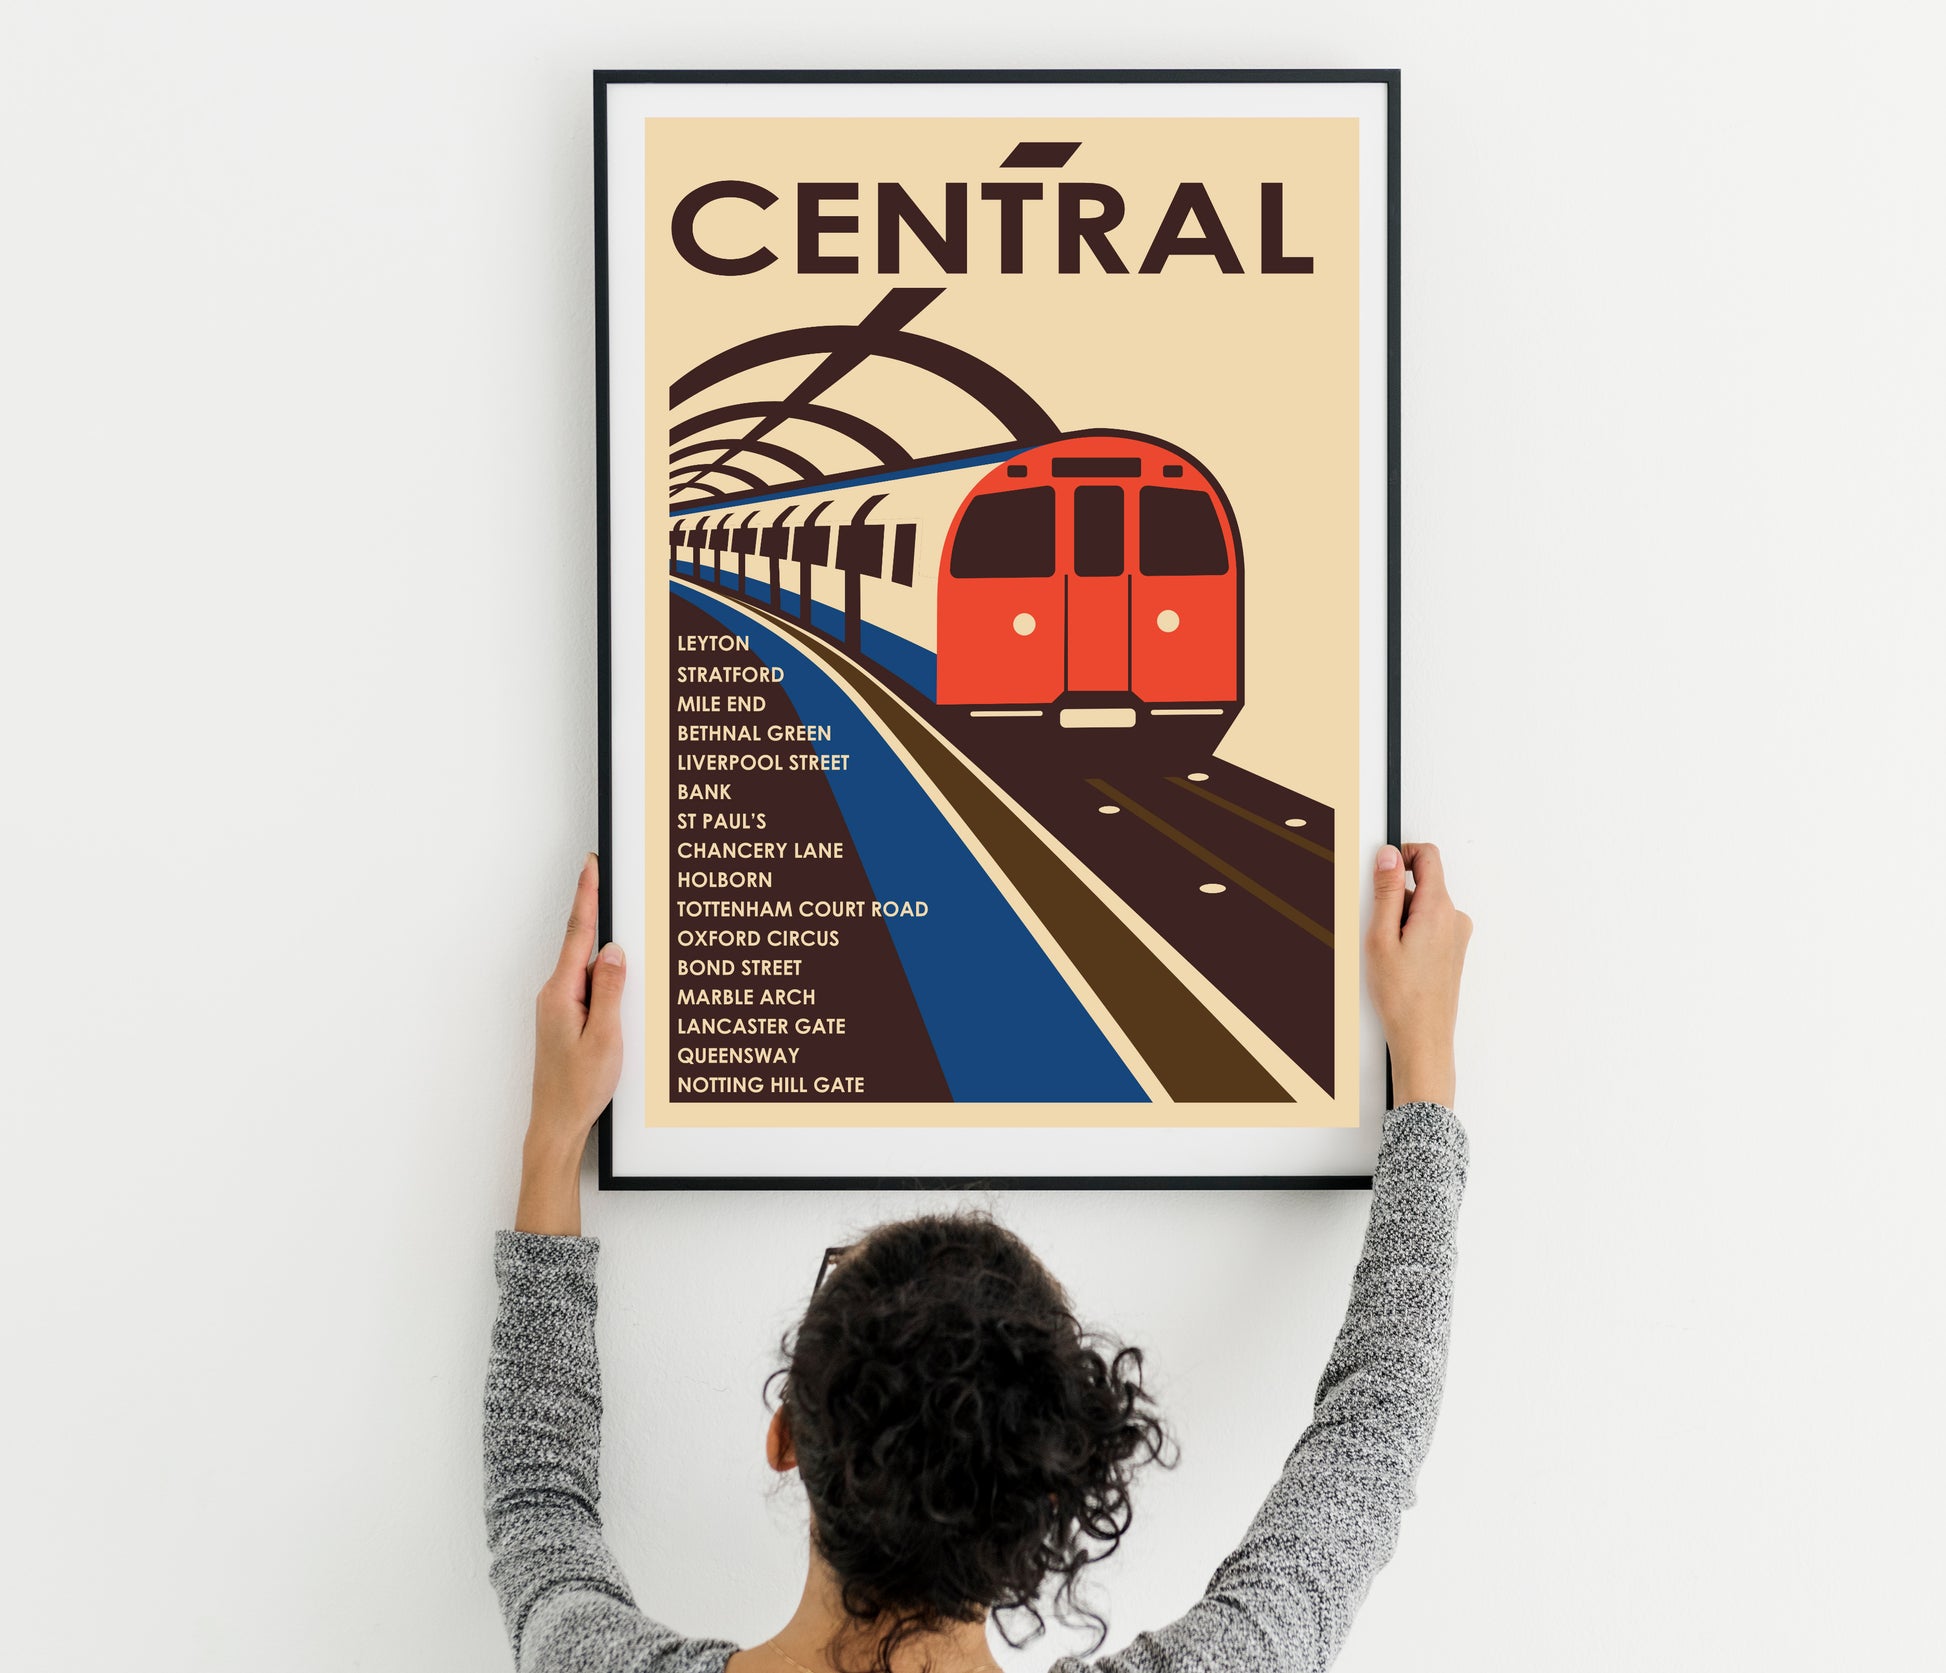 Retro-style Central Line central section poster design, a picture of a train on a train track, a woman holding up a poster with a train on it